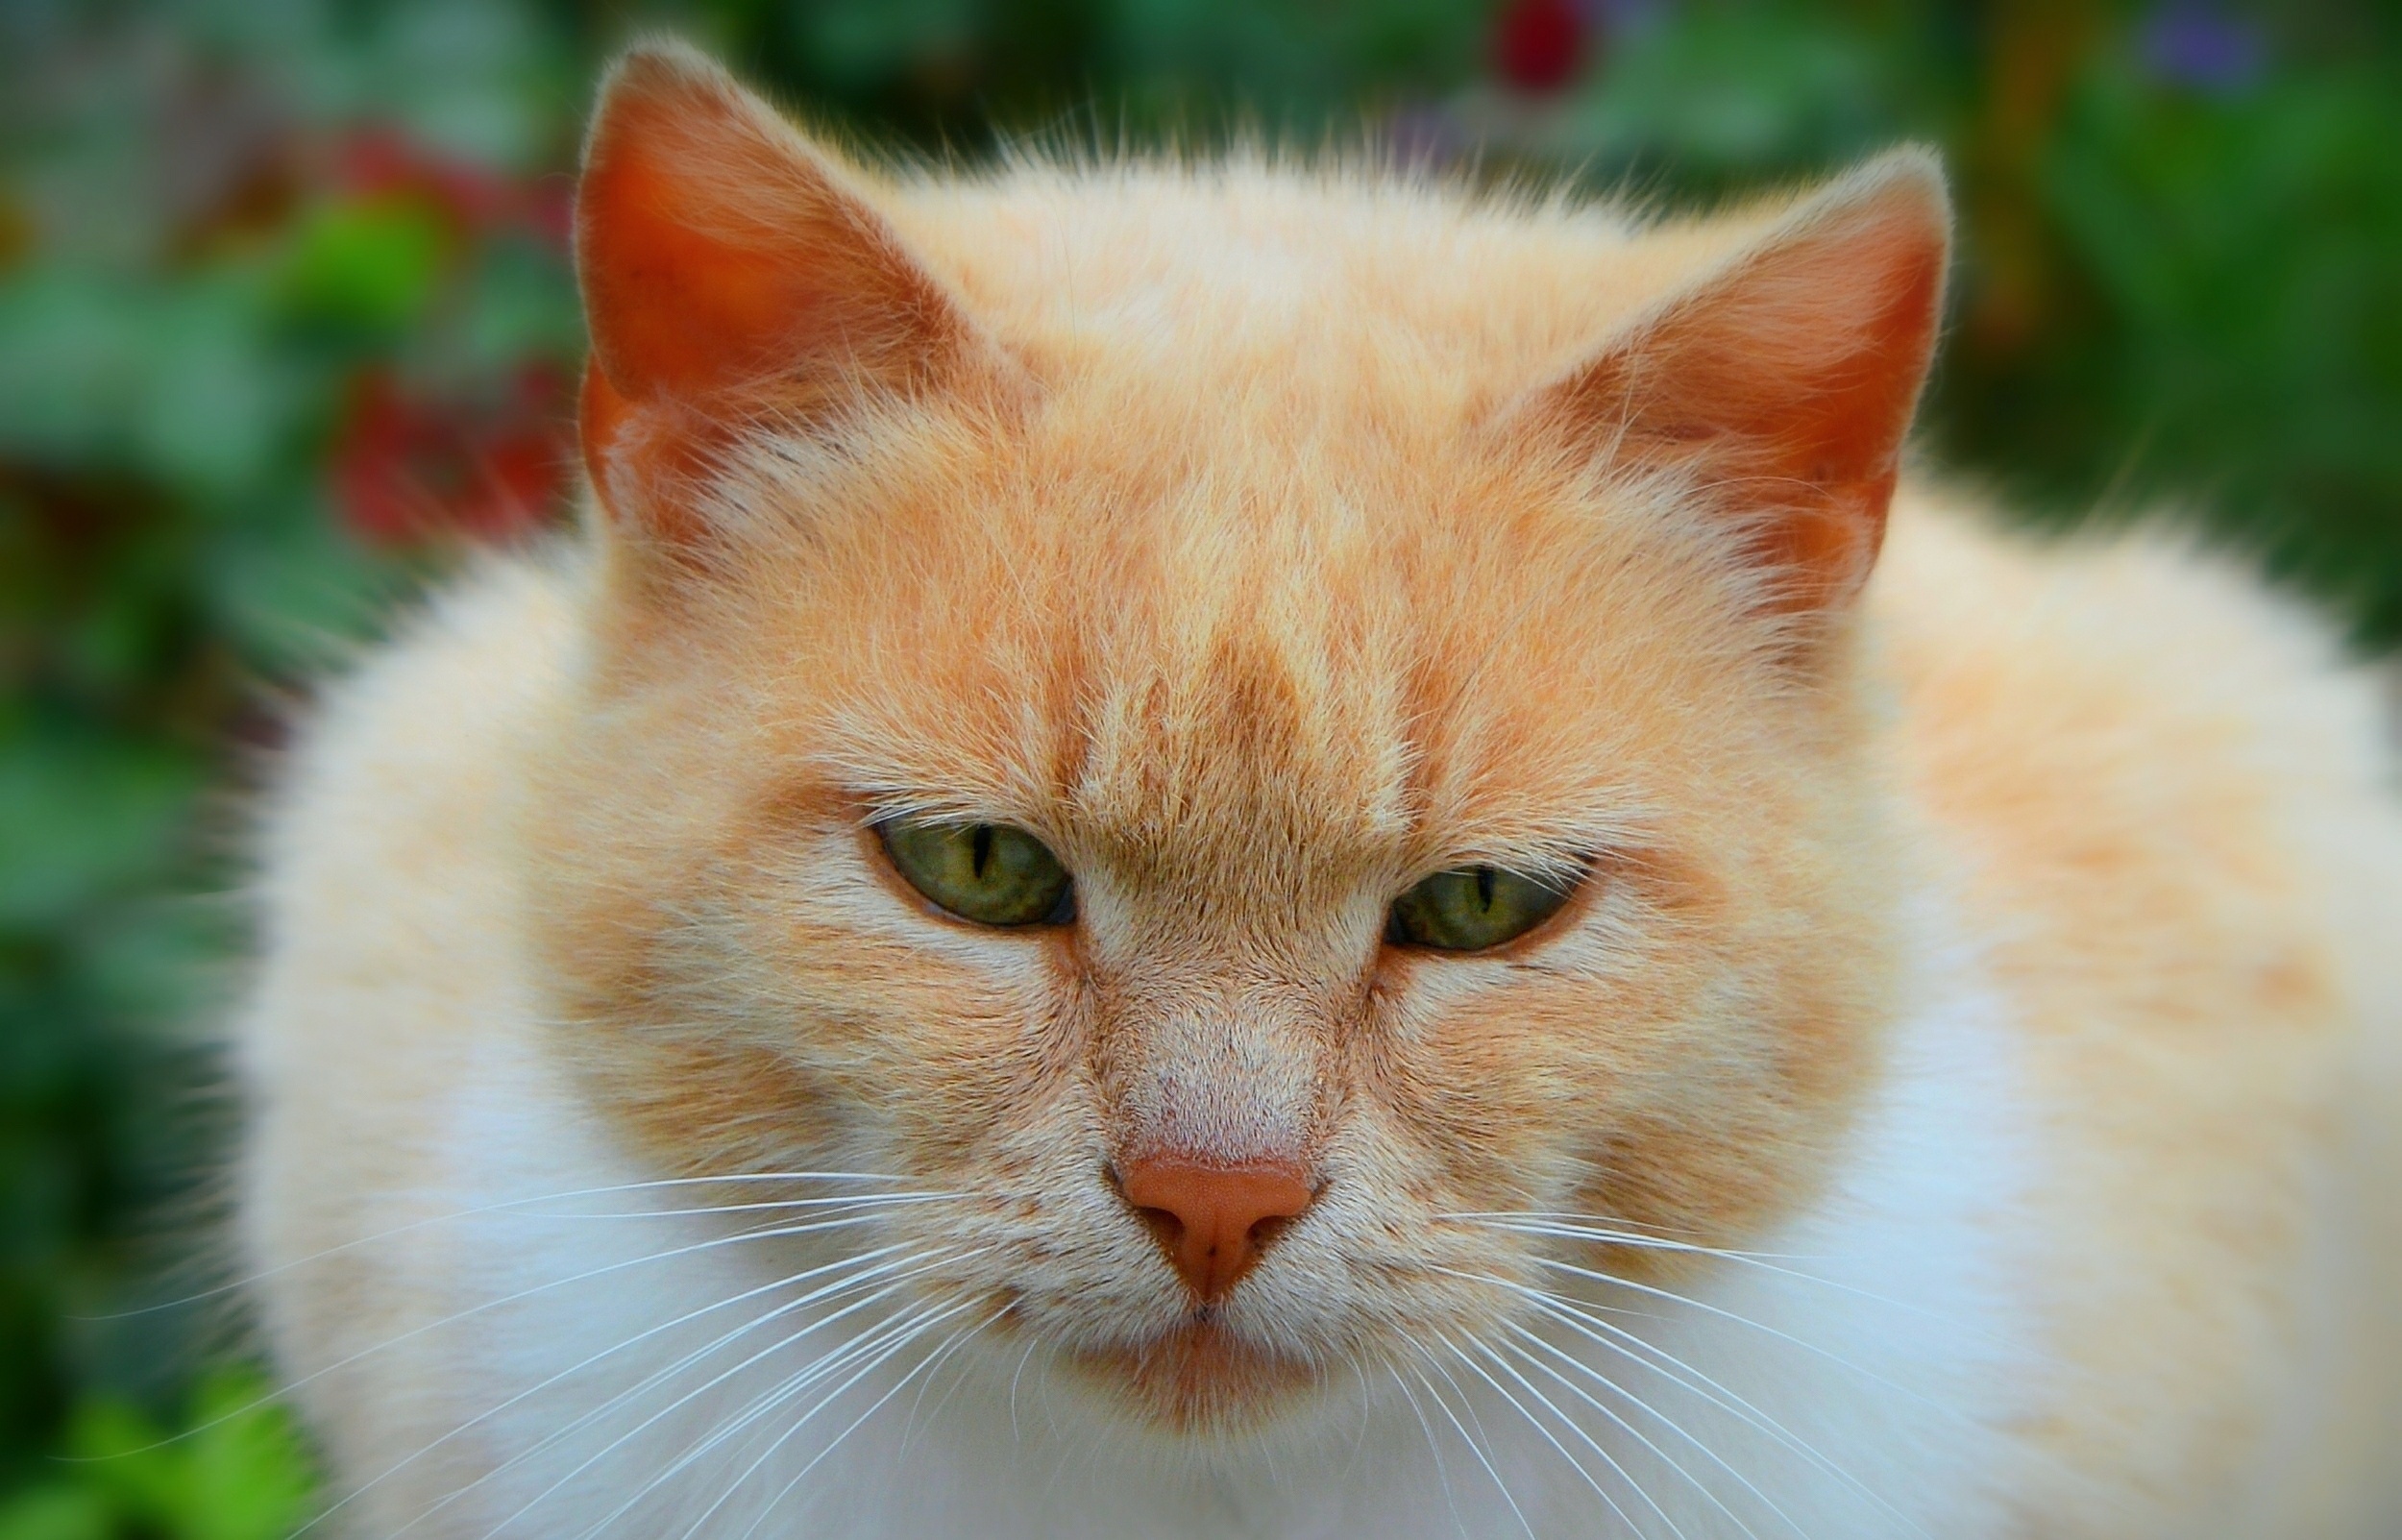 General 2500x1603 cats outdoors animals nature ginger (color) feline closeup